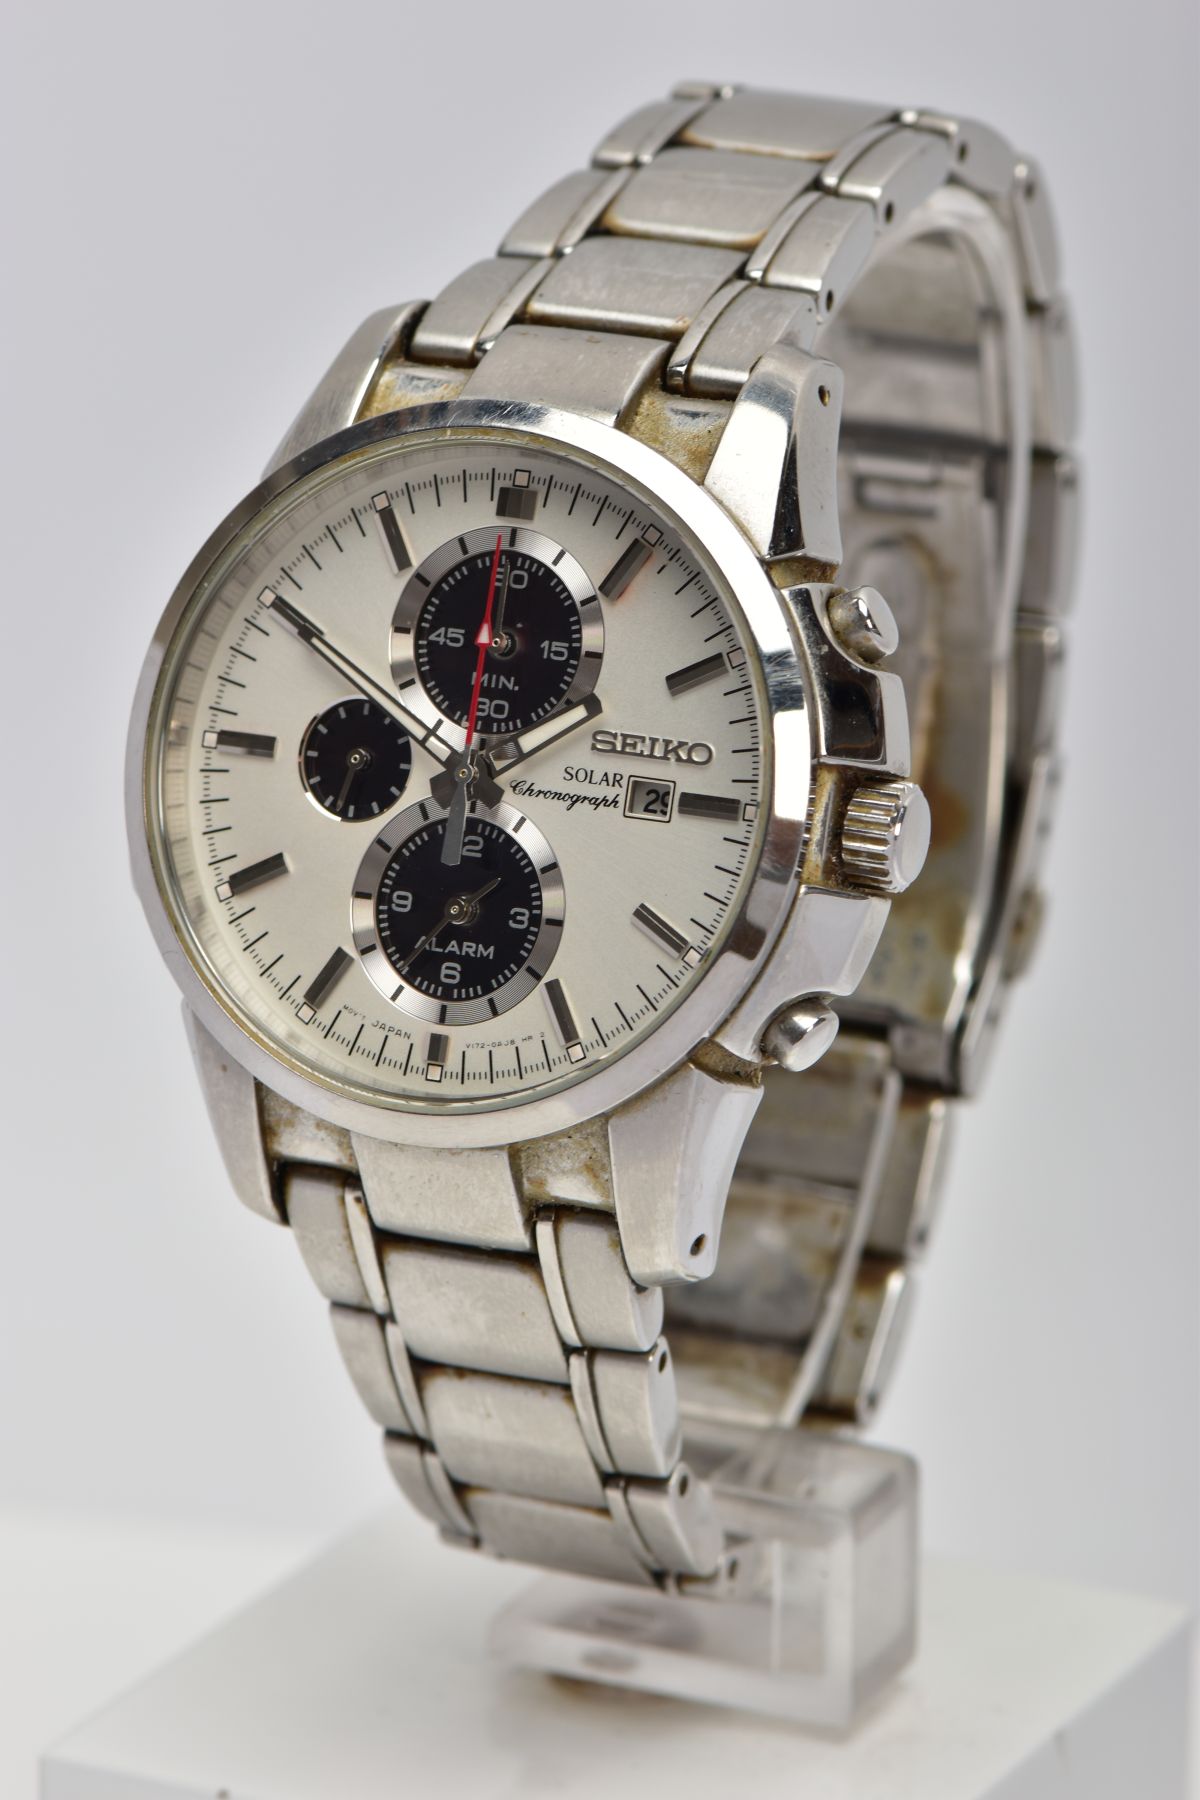 A SEIKO SOLAR CHRONOGRAPH ALARM STAINLESS STEEL WRISTWATCH, silvered dial with black subsidiary - Image 3 of 6